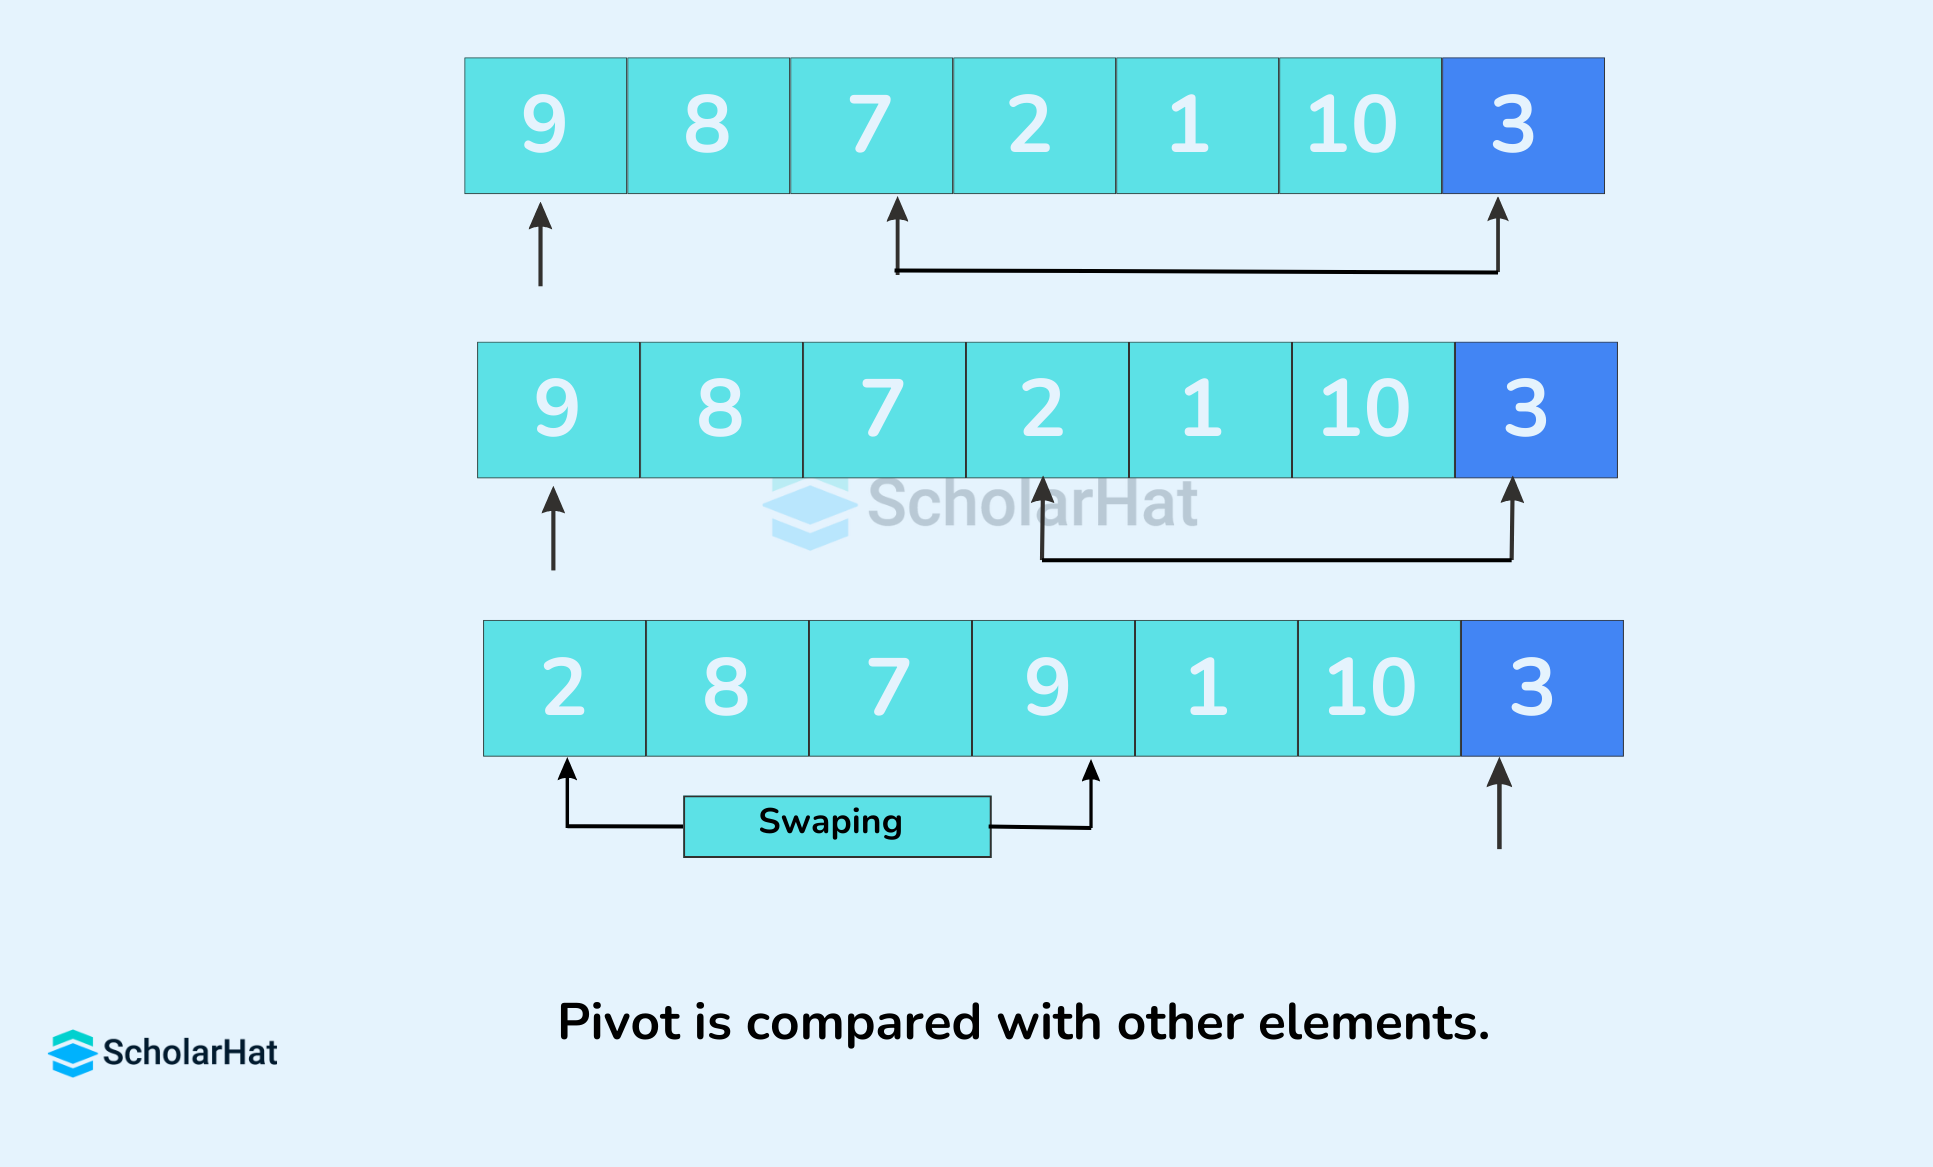 Pivot is compared with other elements